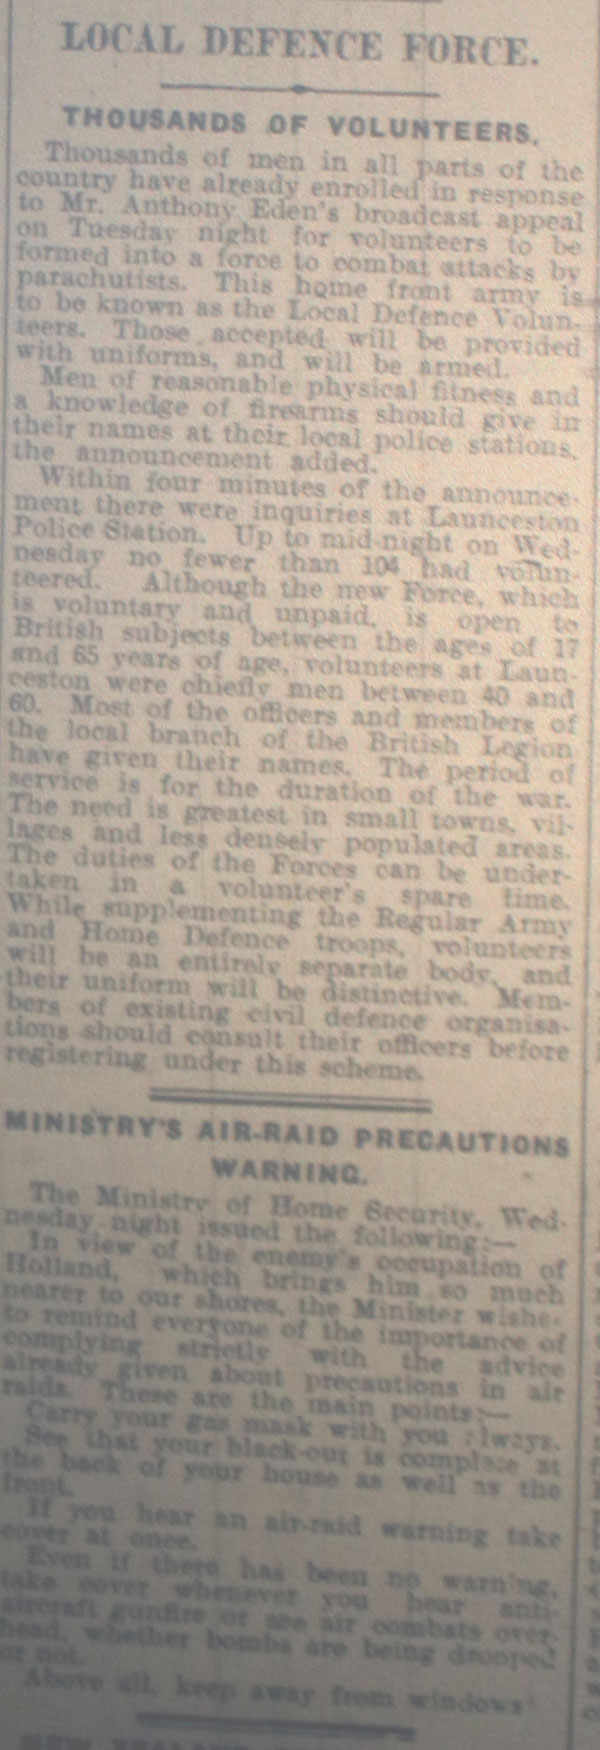 Local Defence Force May 9th, 1940.